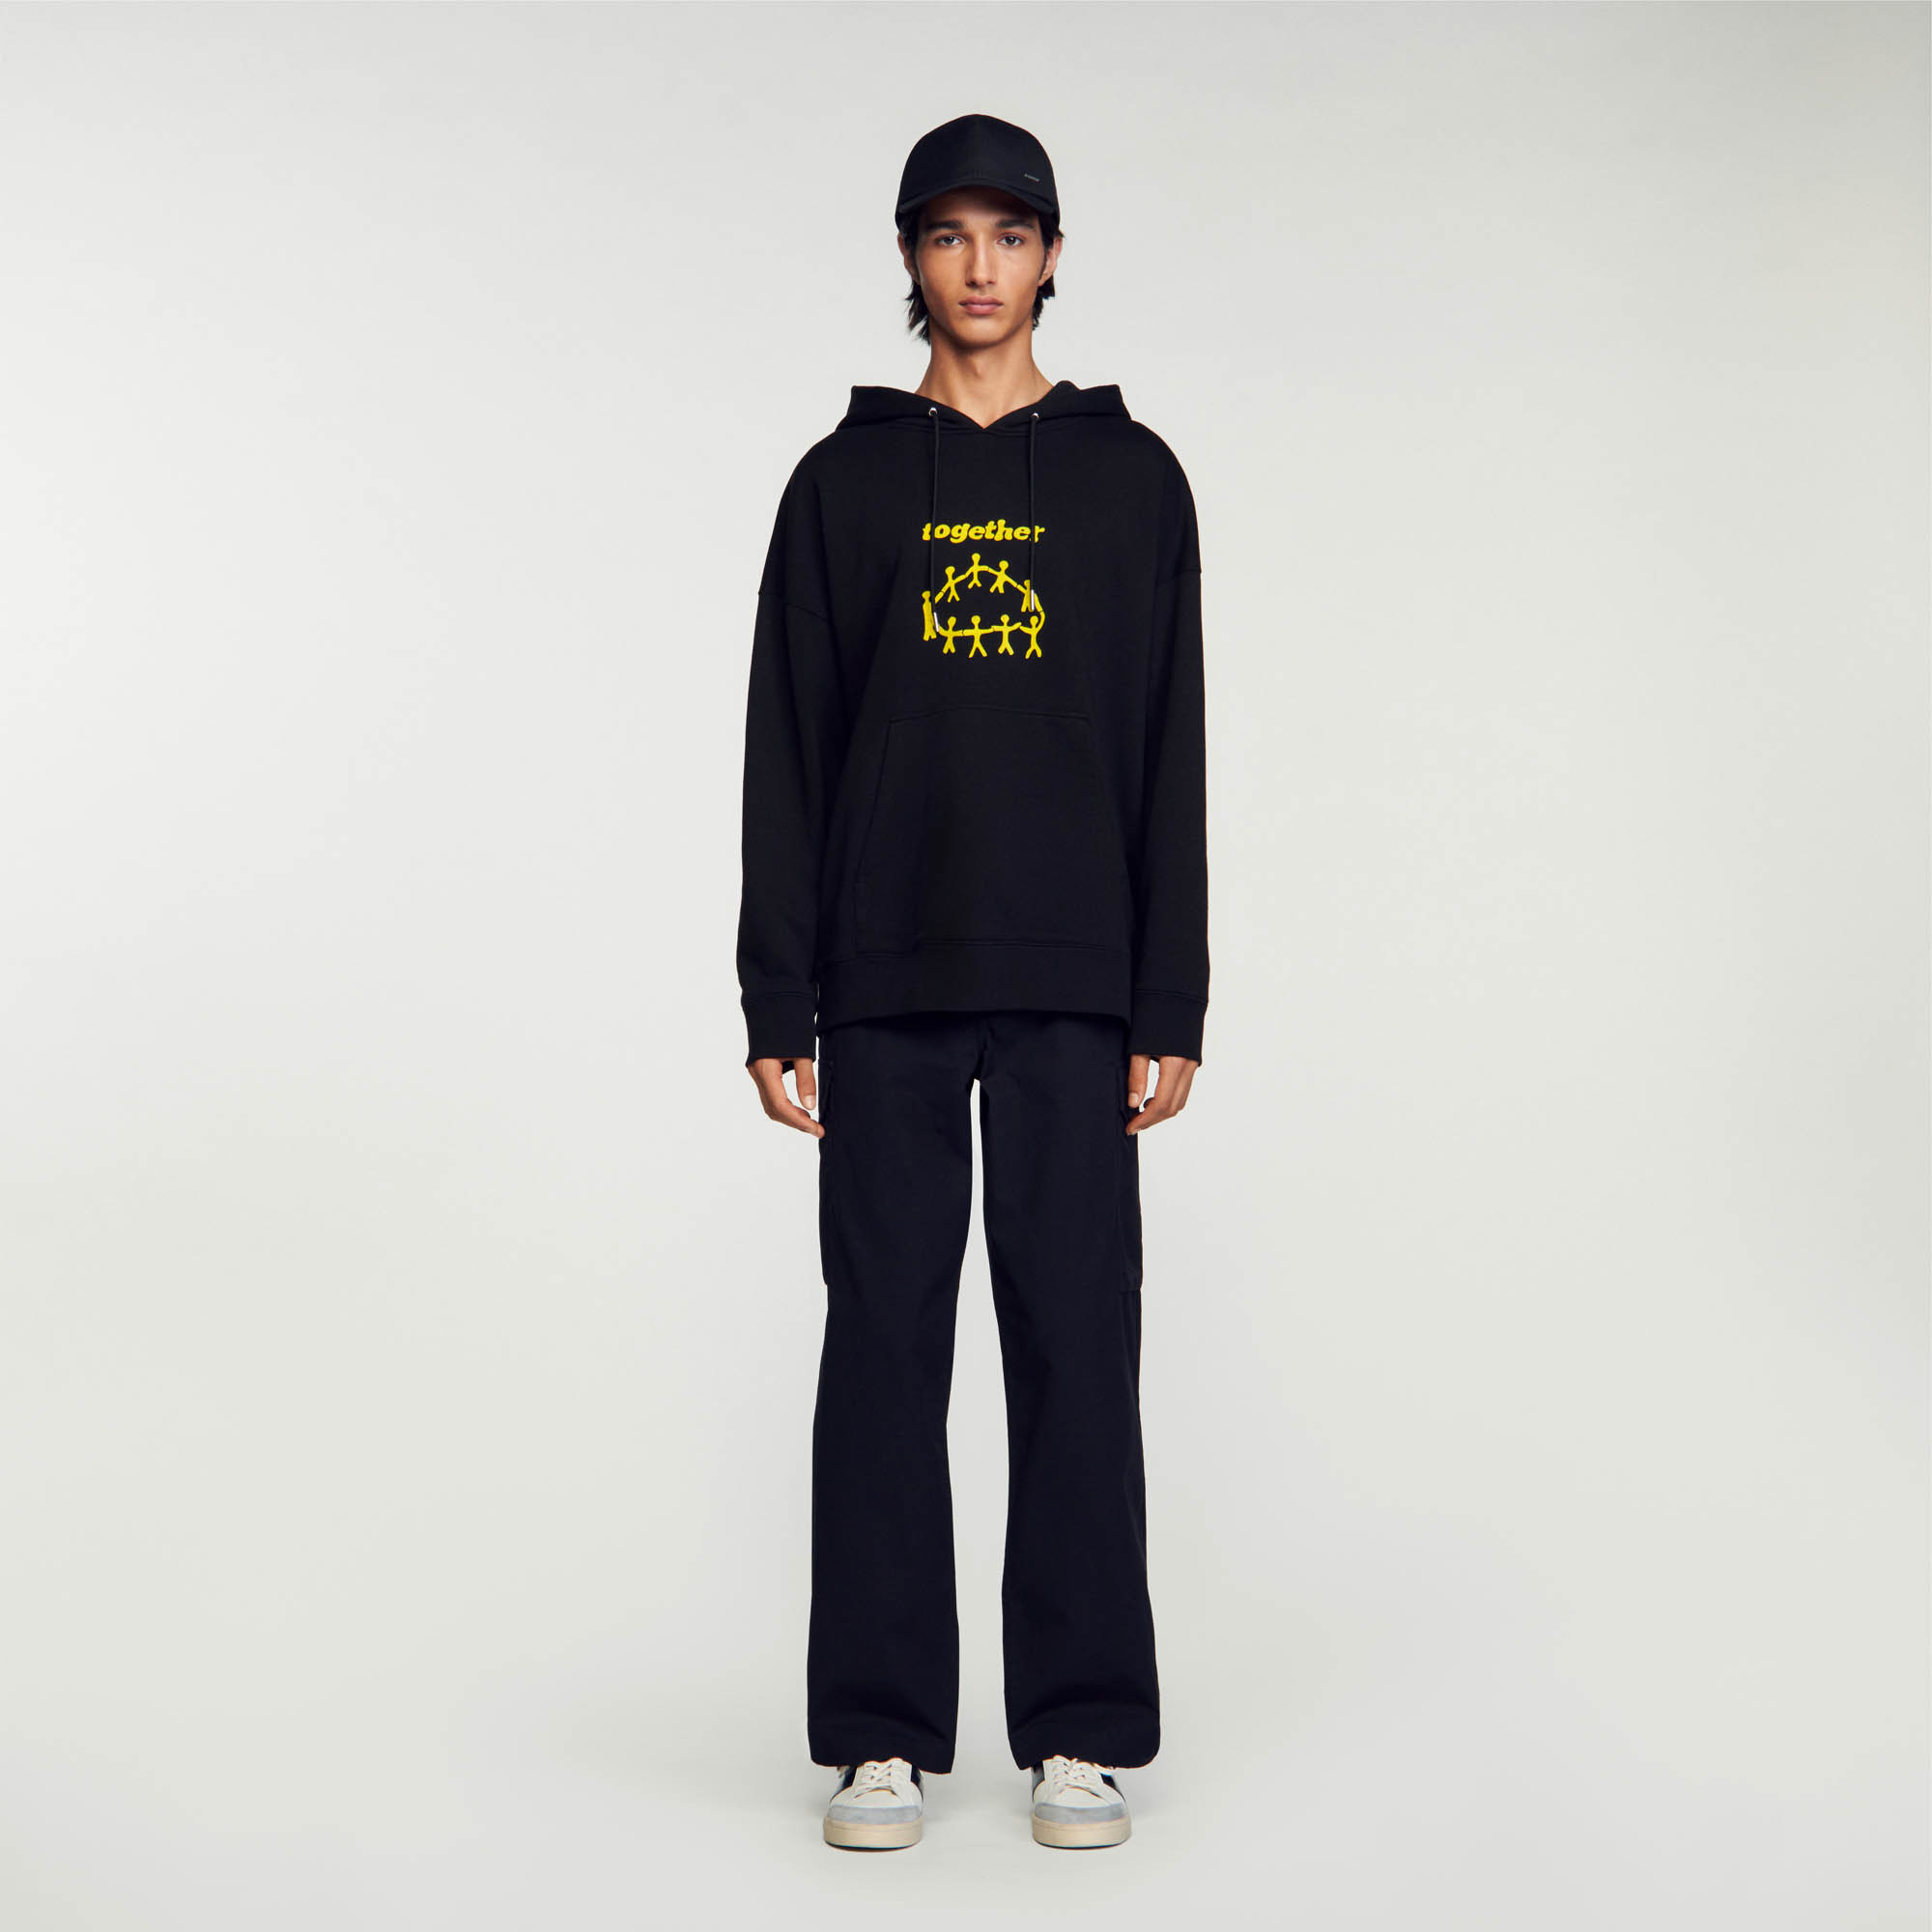 Sandro cotton Rib: Oversized hoodie in brushed cotton fleece with drawstring hood, long sleeves and kangaroo pouch pocket, embellished with front Together flocking and contrasting Sandro embroidery